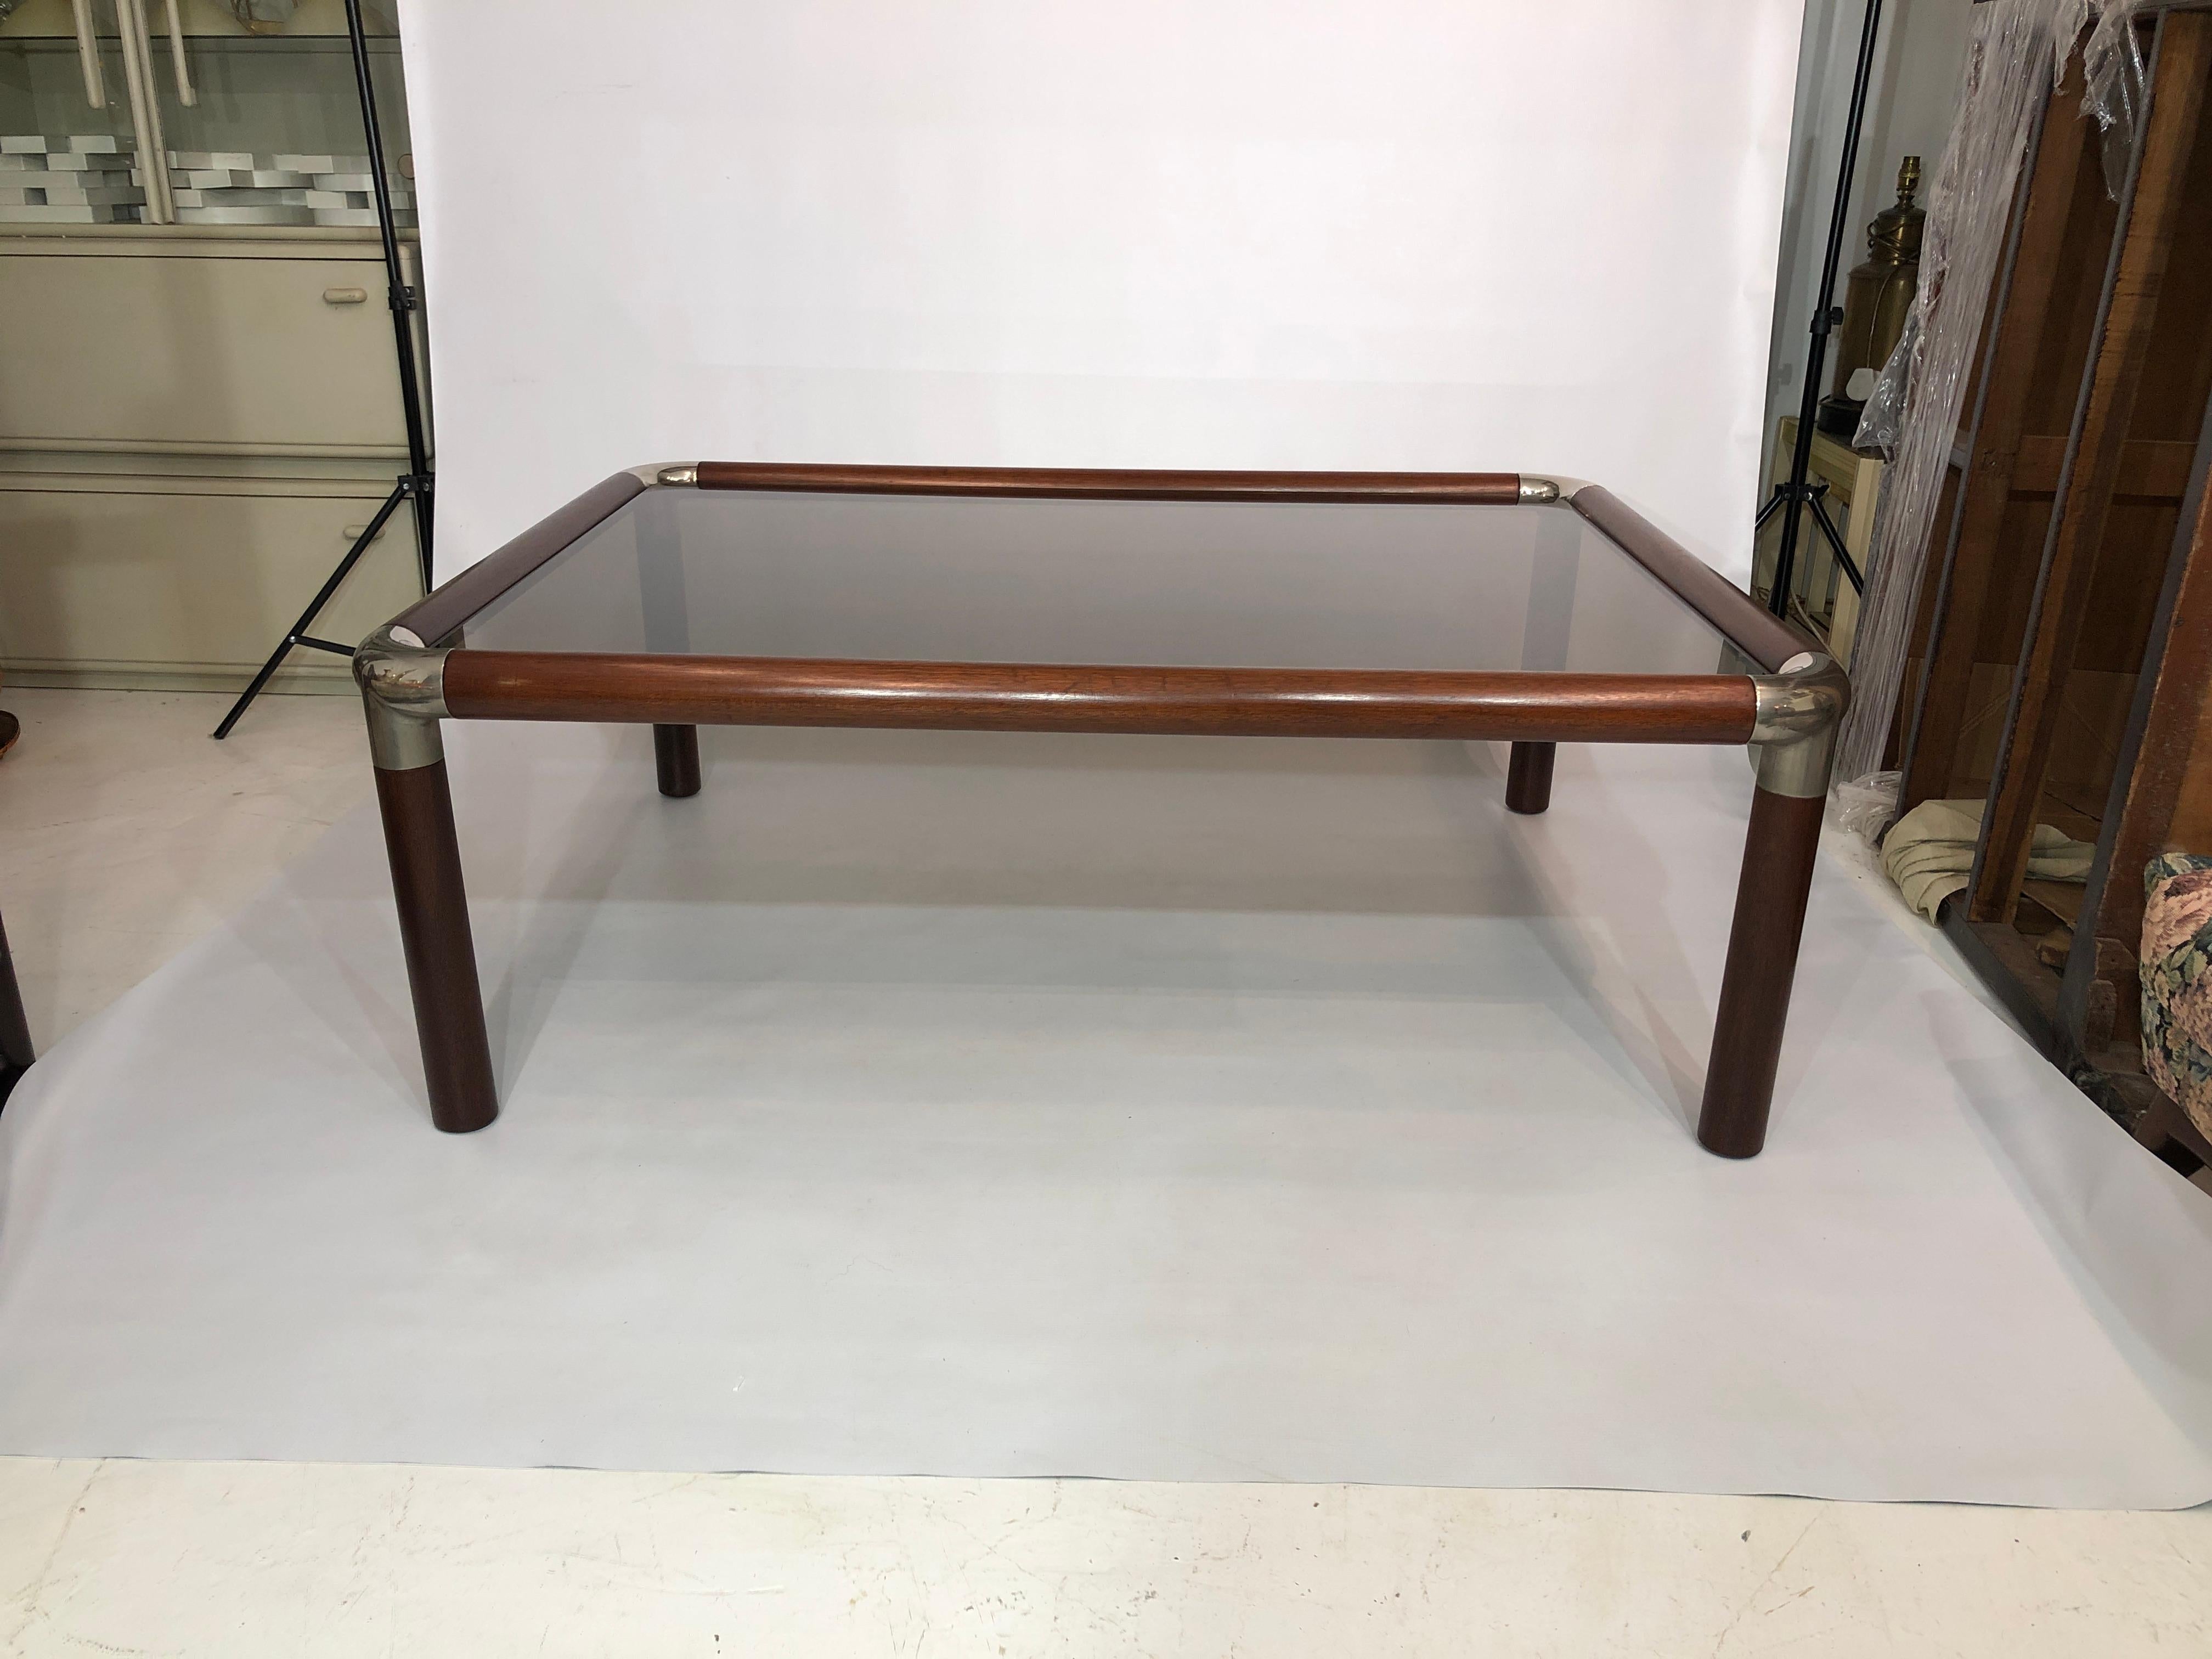 A large and impressive 1970’s Ronald Schmitt designer coffee table. Possibly designed by Rodney Kinsman as it is similar to the Model T14 he designed for Bieffeplast in the 1970’s. 

The table frame is mahogany which we have restored and refinished